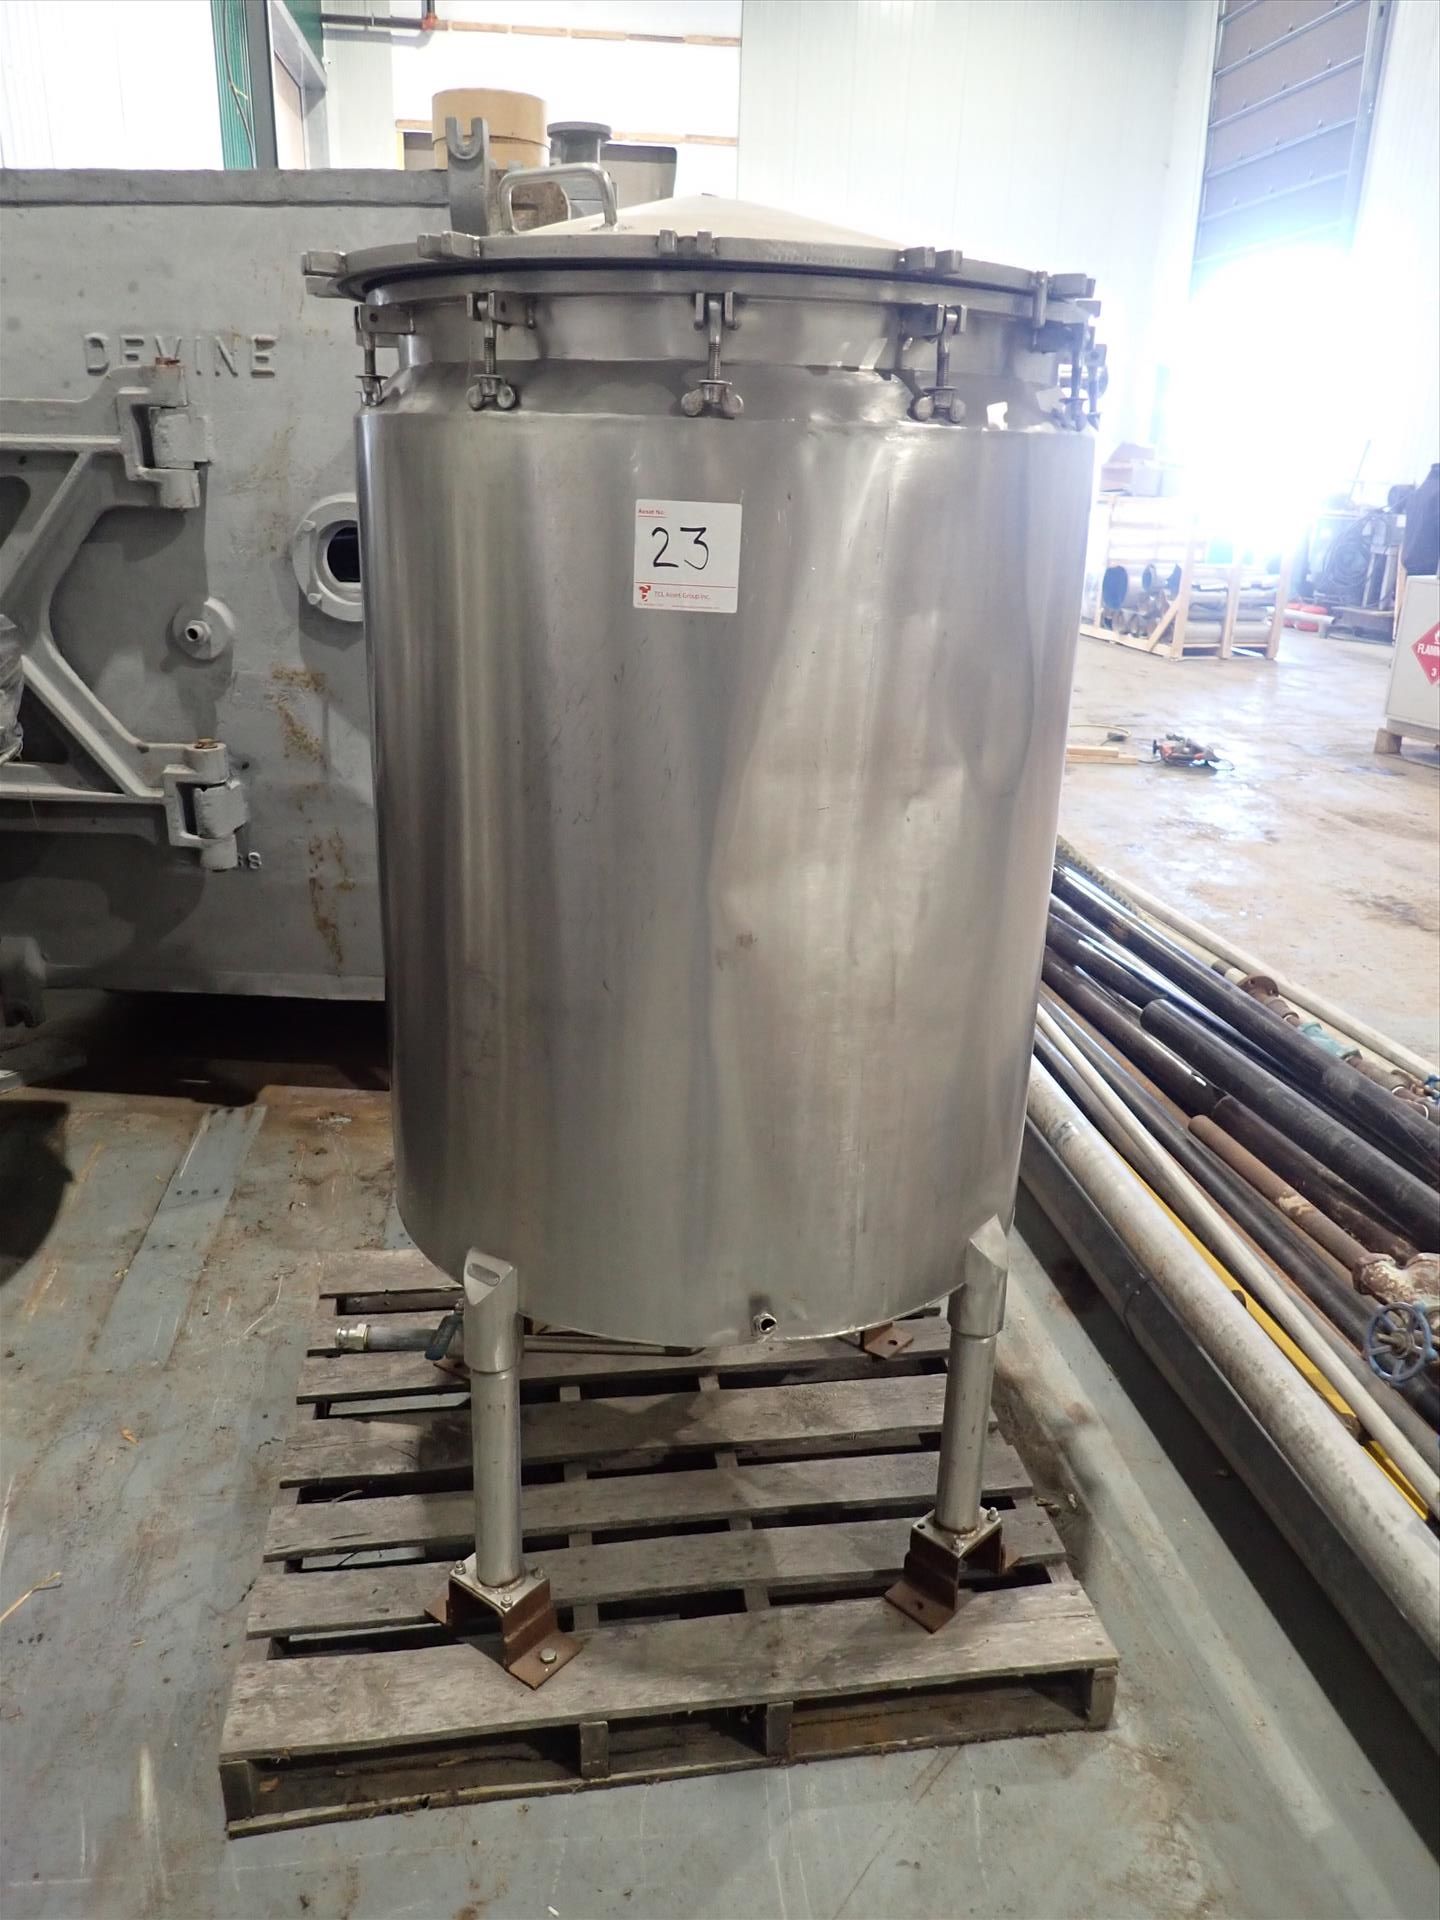 Stainless Steel Pressure Vessel, jacketed, bottom discharge, approx. 36 in. dia. x 45 in.